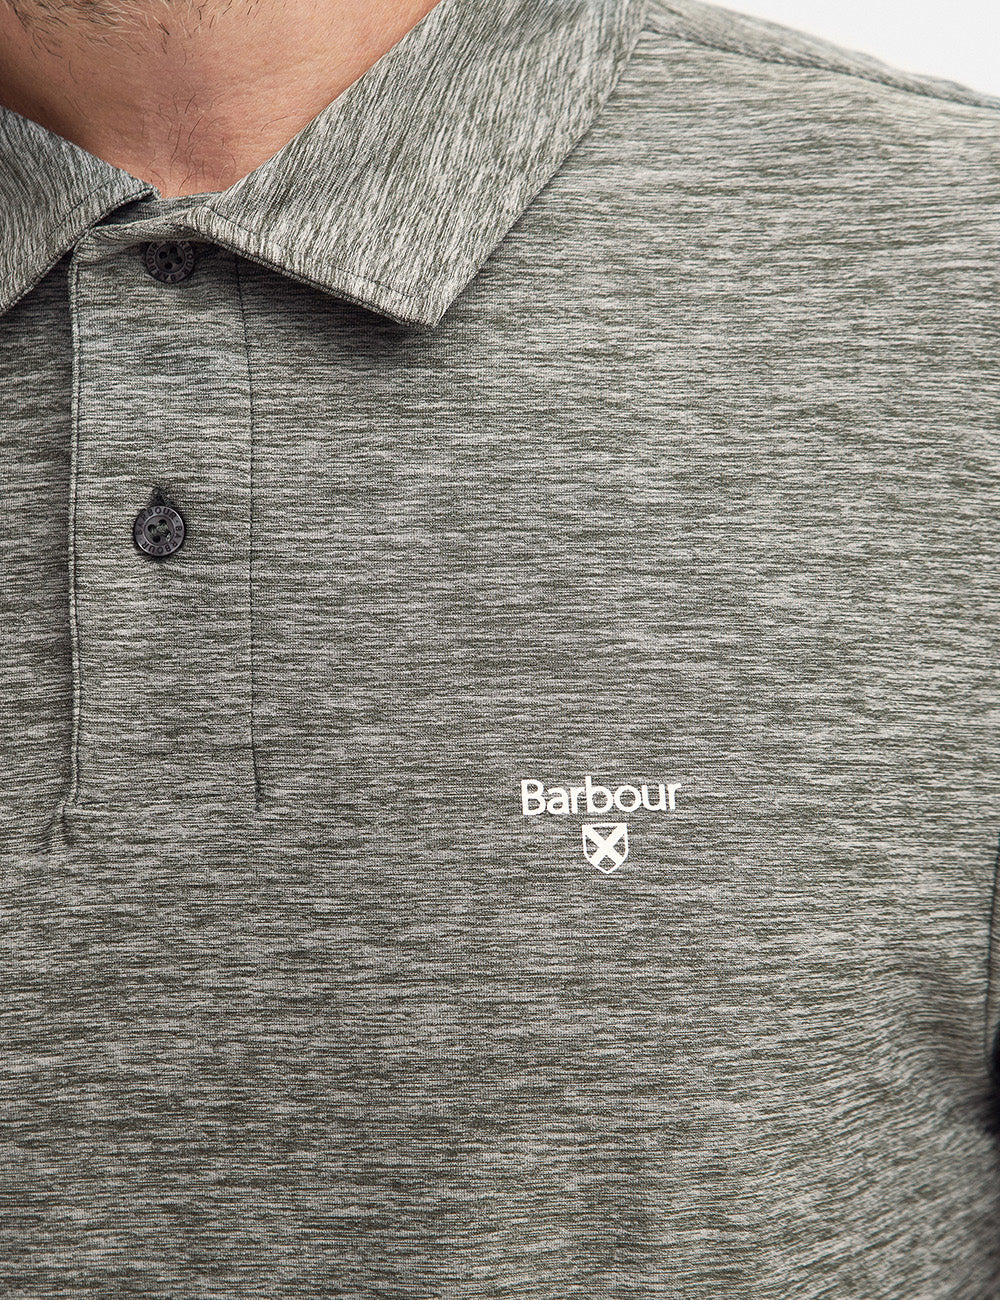 Barbour Bransdale Polo Shirt - Olive